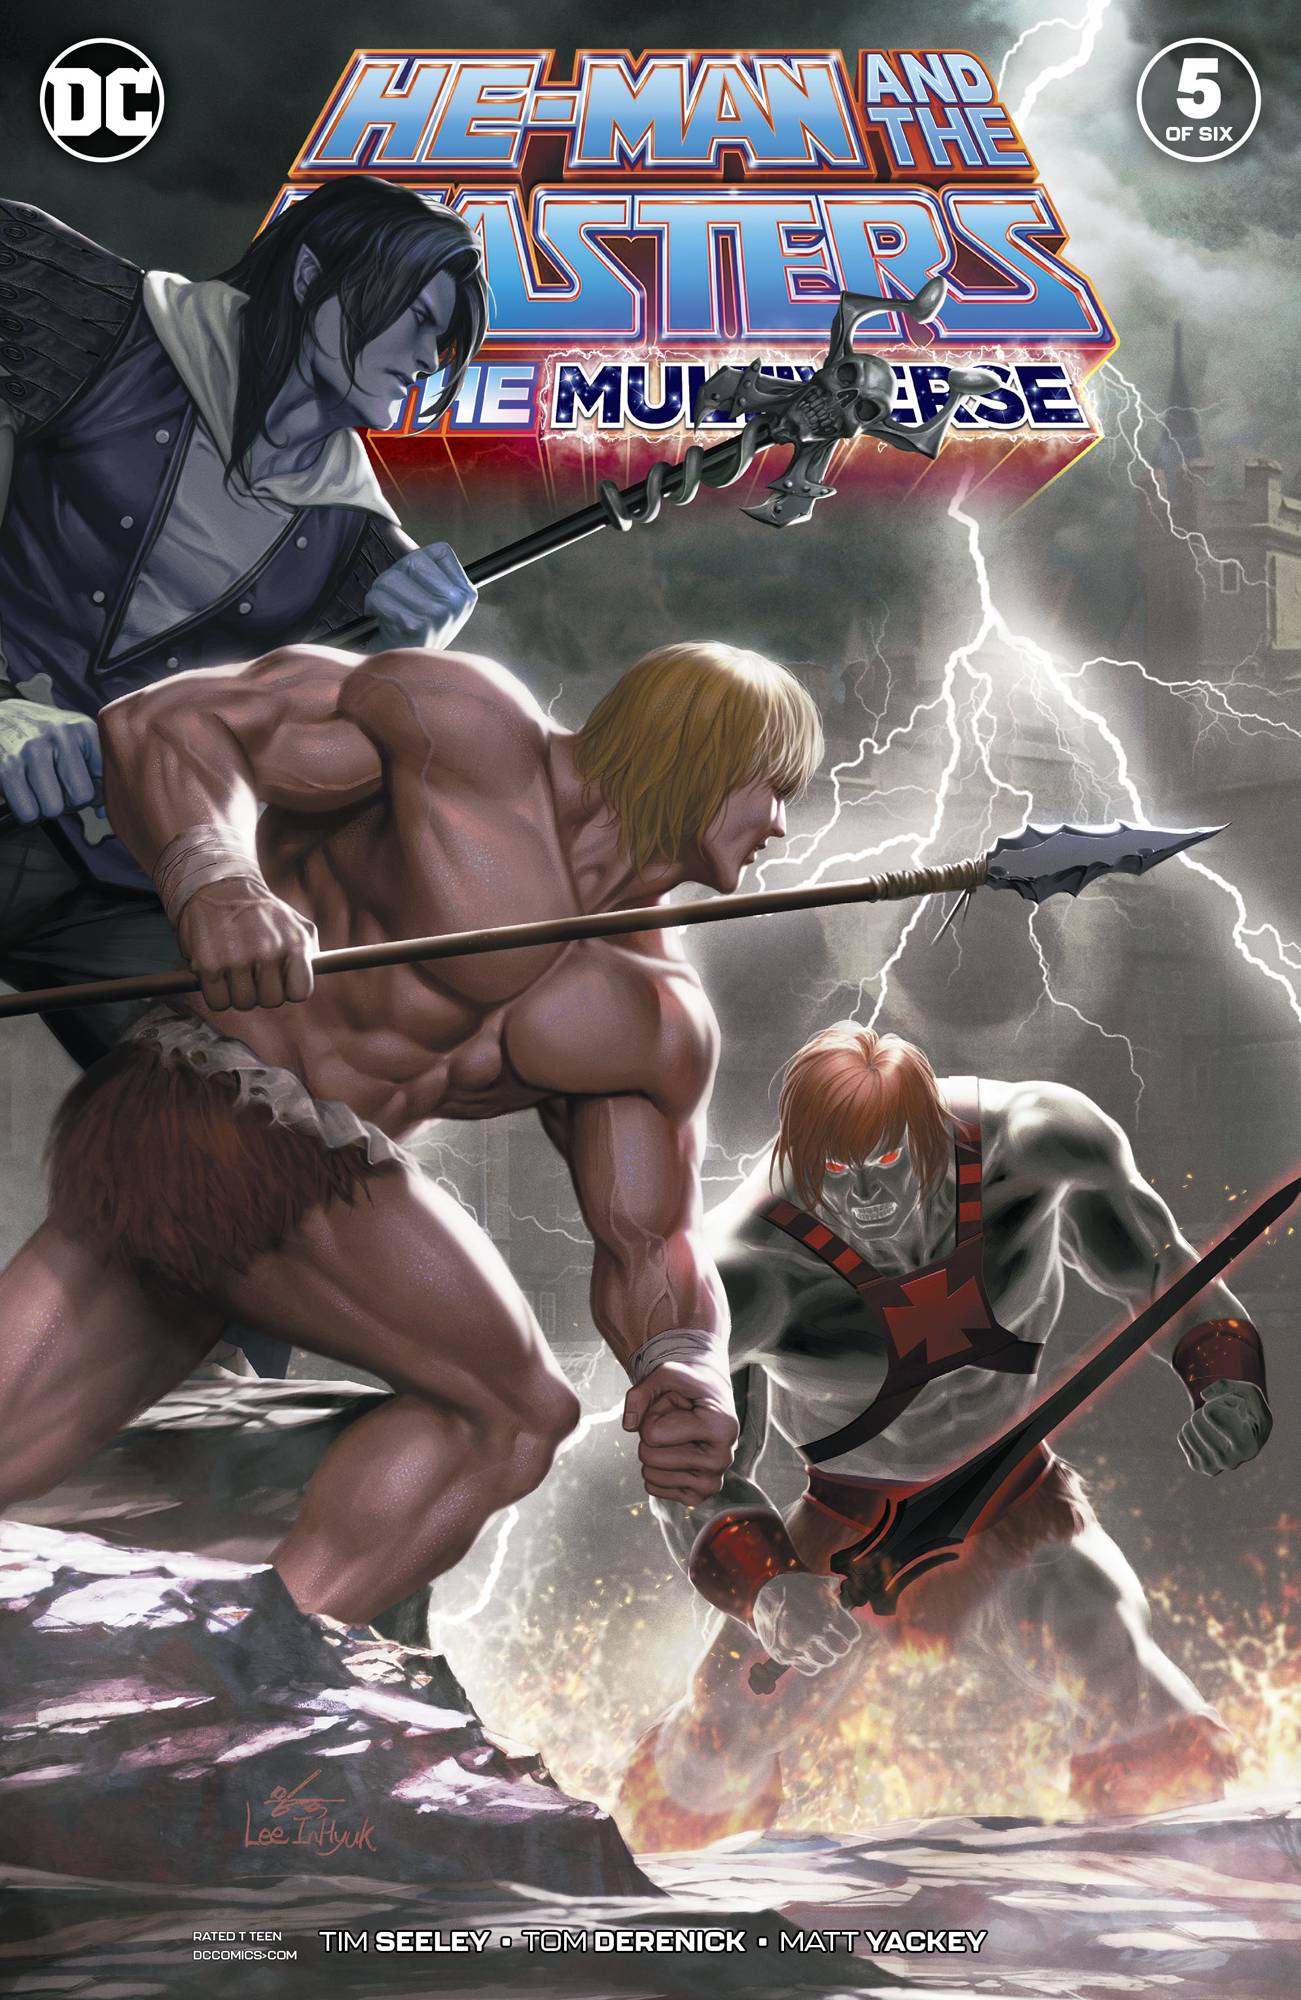 HE-MAN AND THE MASTERS OF THE MULTIVERSE #5 (OF 6) 2020